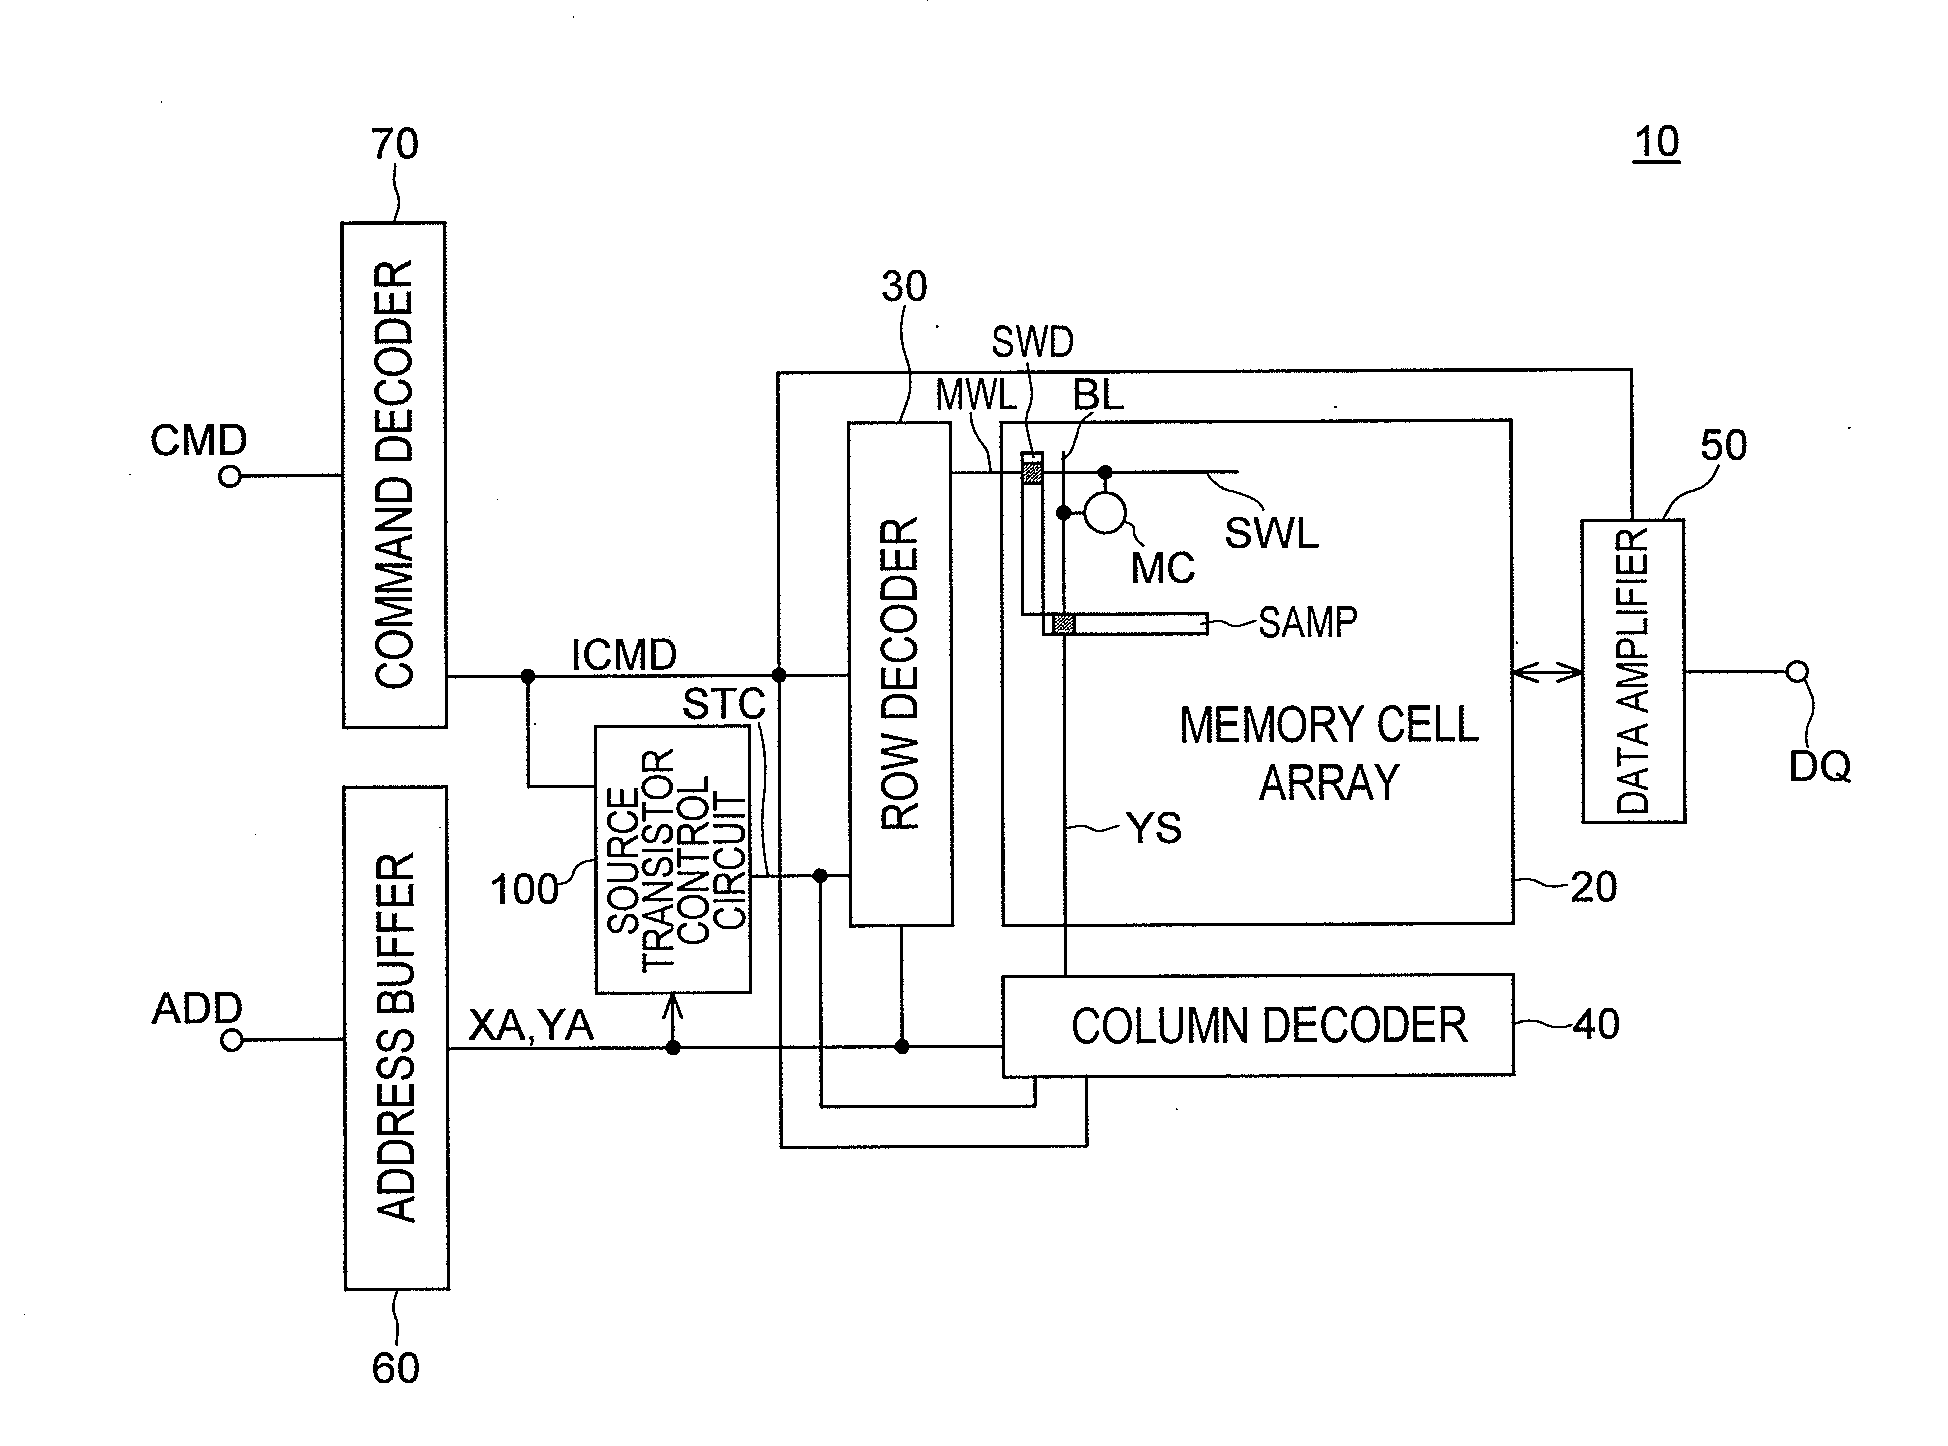 Semiconductor memory device having selective activation circuit for selectively activating circuit areas